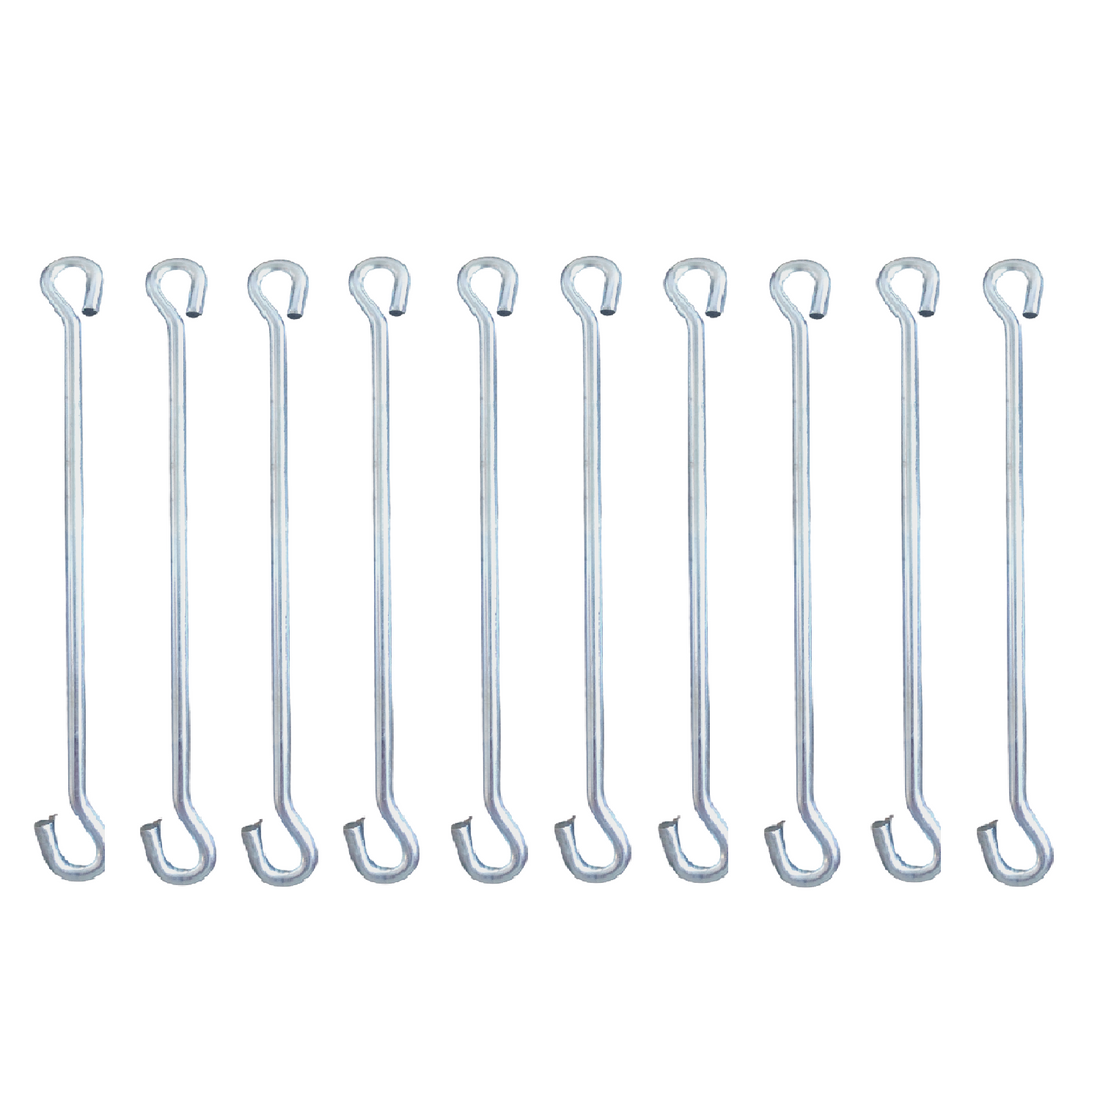 Hanging Accessories Set for Porch Swings - 10 Rod